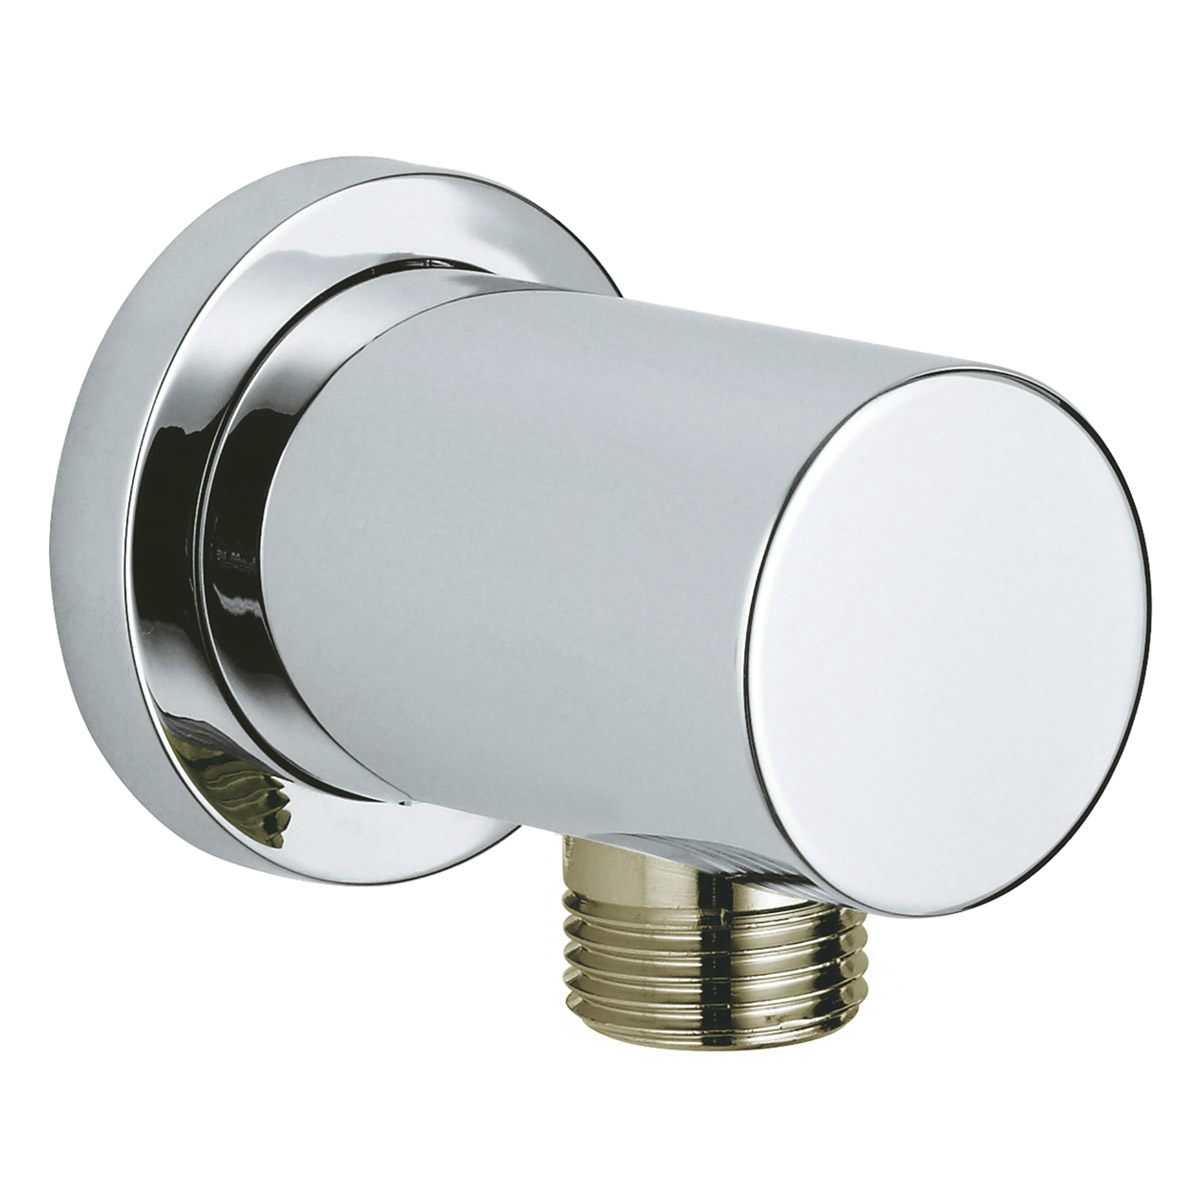 Grohe Rainshower round shower outlet